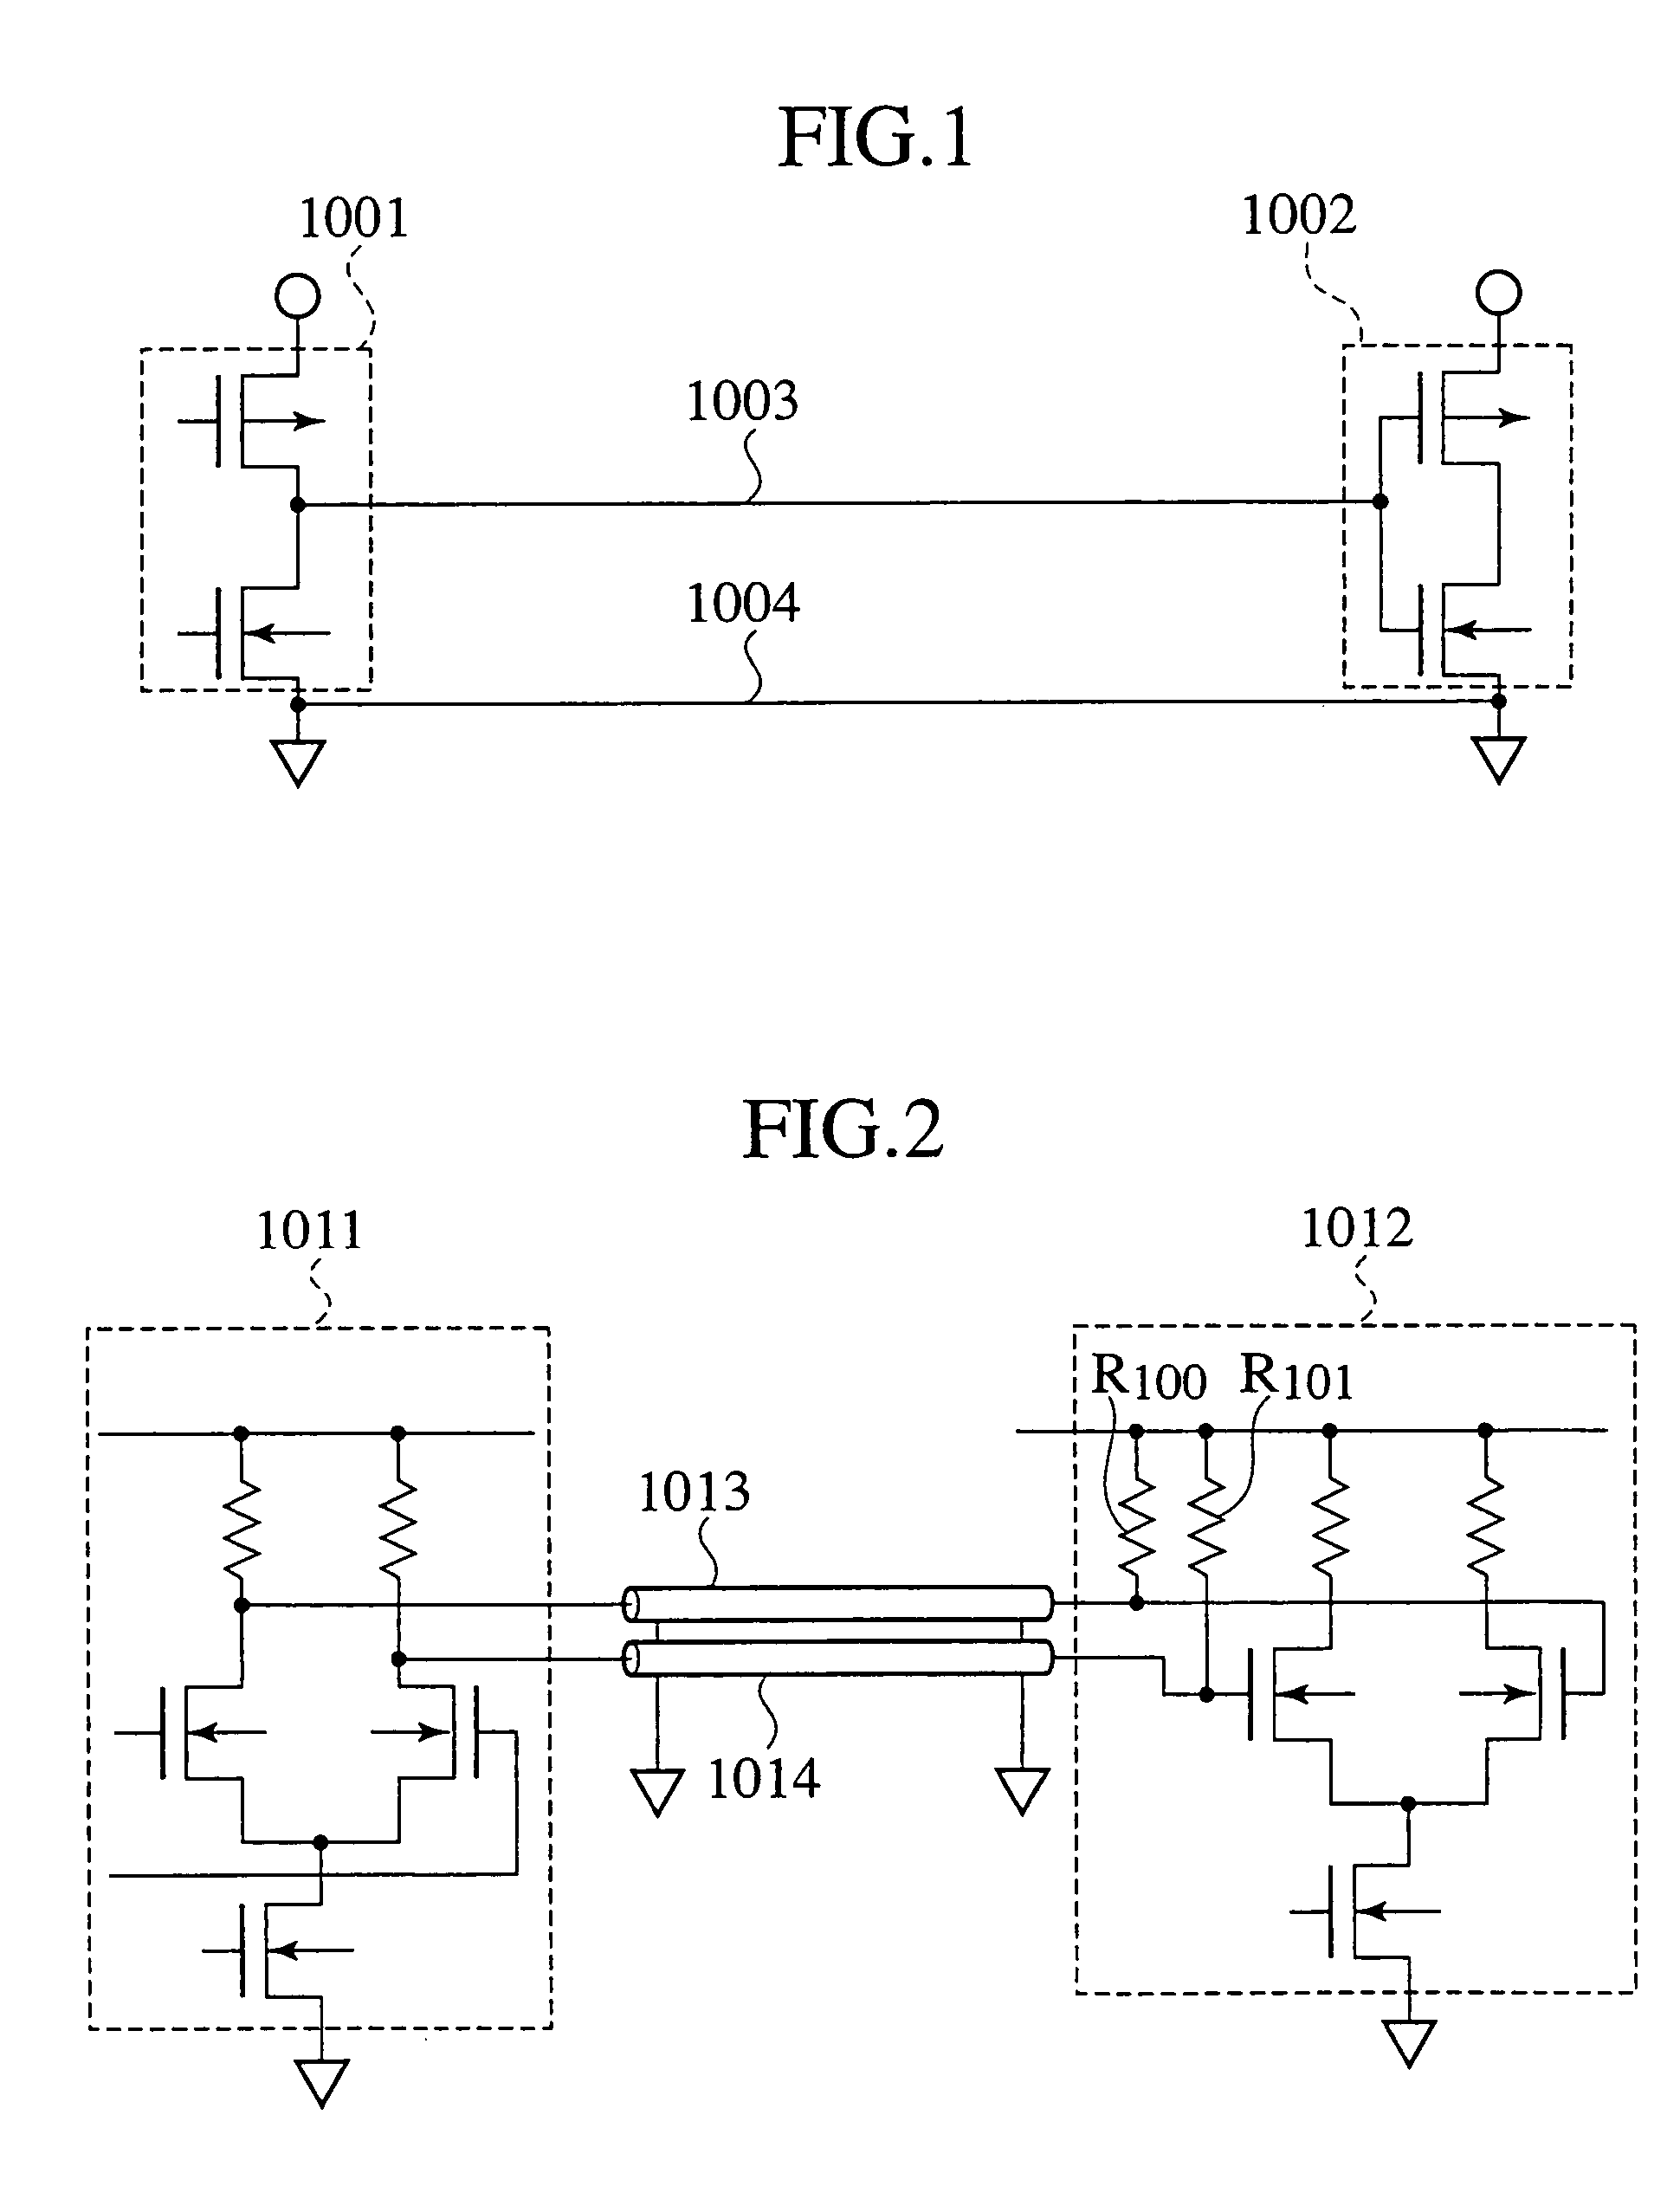 Transmission cable structure for GHz frequency band signals and connector used for transmission of GHz frequency band signals